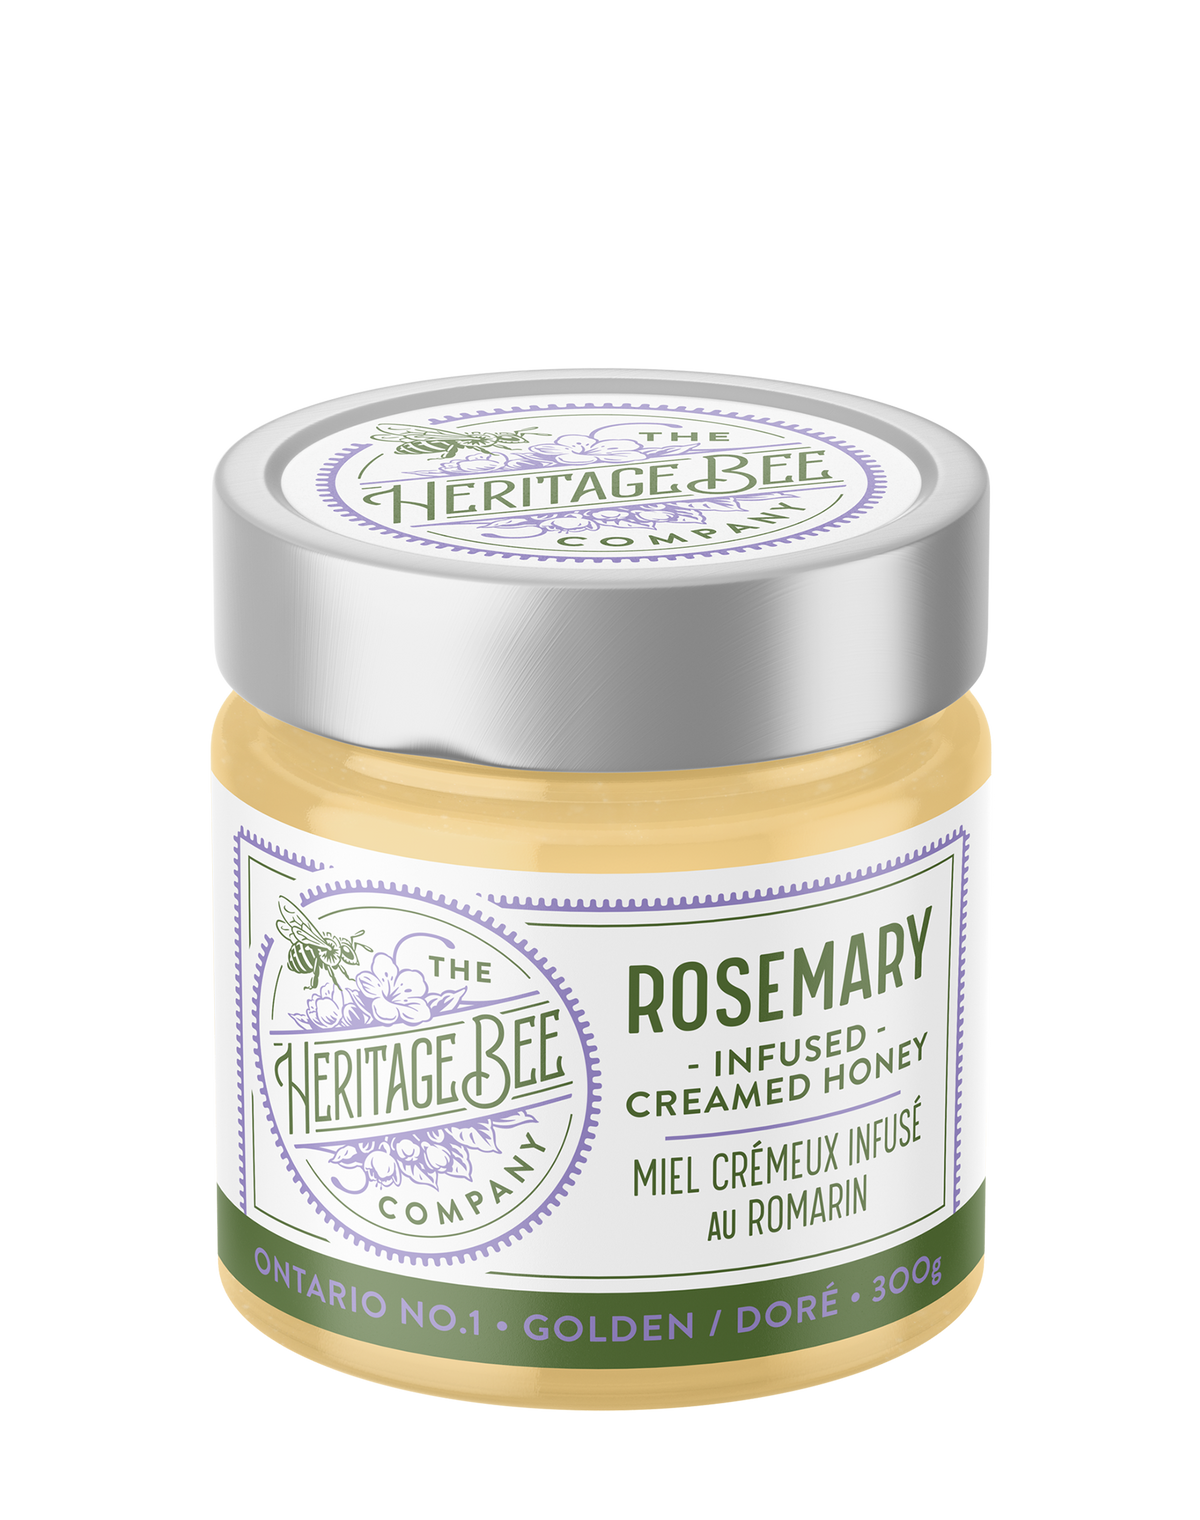 Heritage Bee Co rosemary infused creamed wildflower honey, made with certified organic rosemary. Handcrafted in Ontario. Premium. 